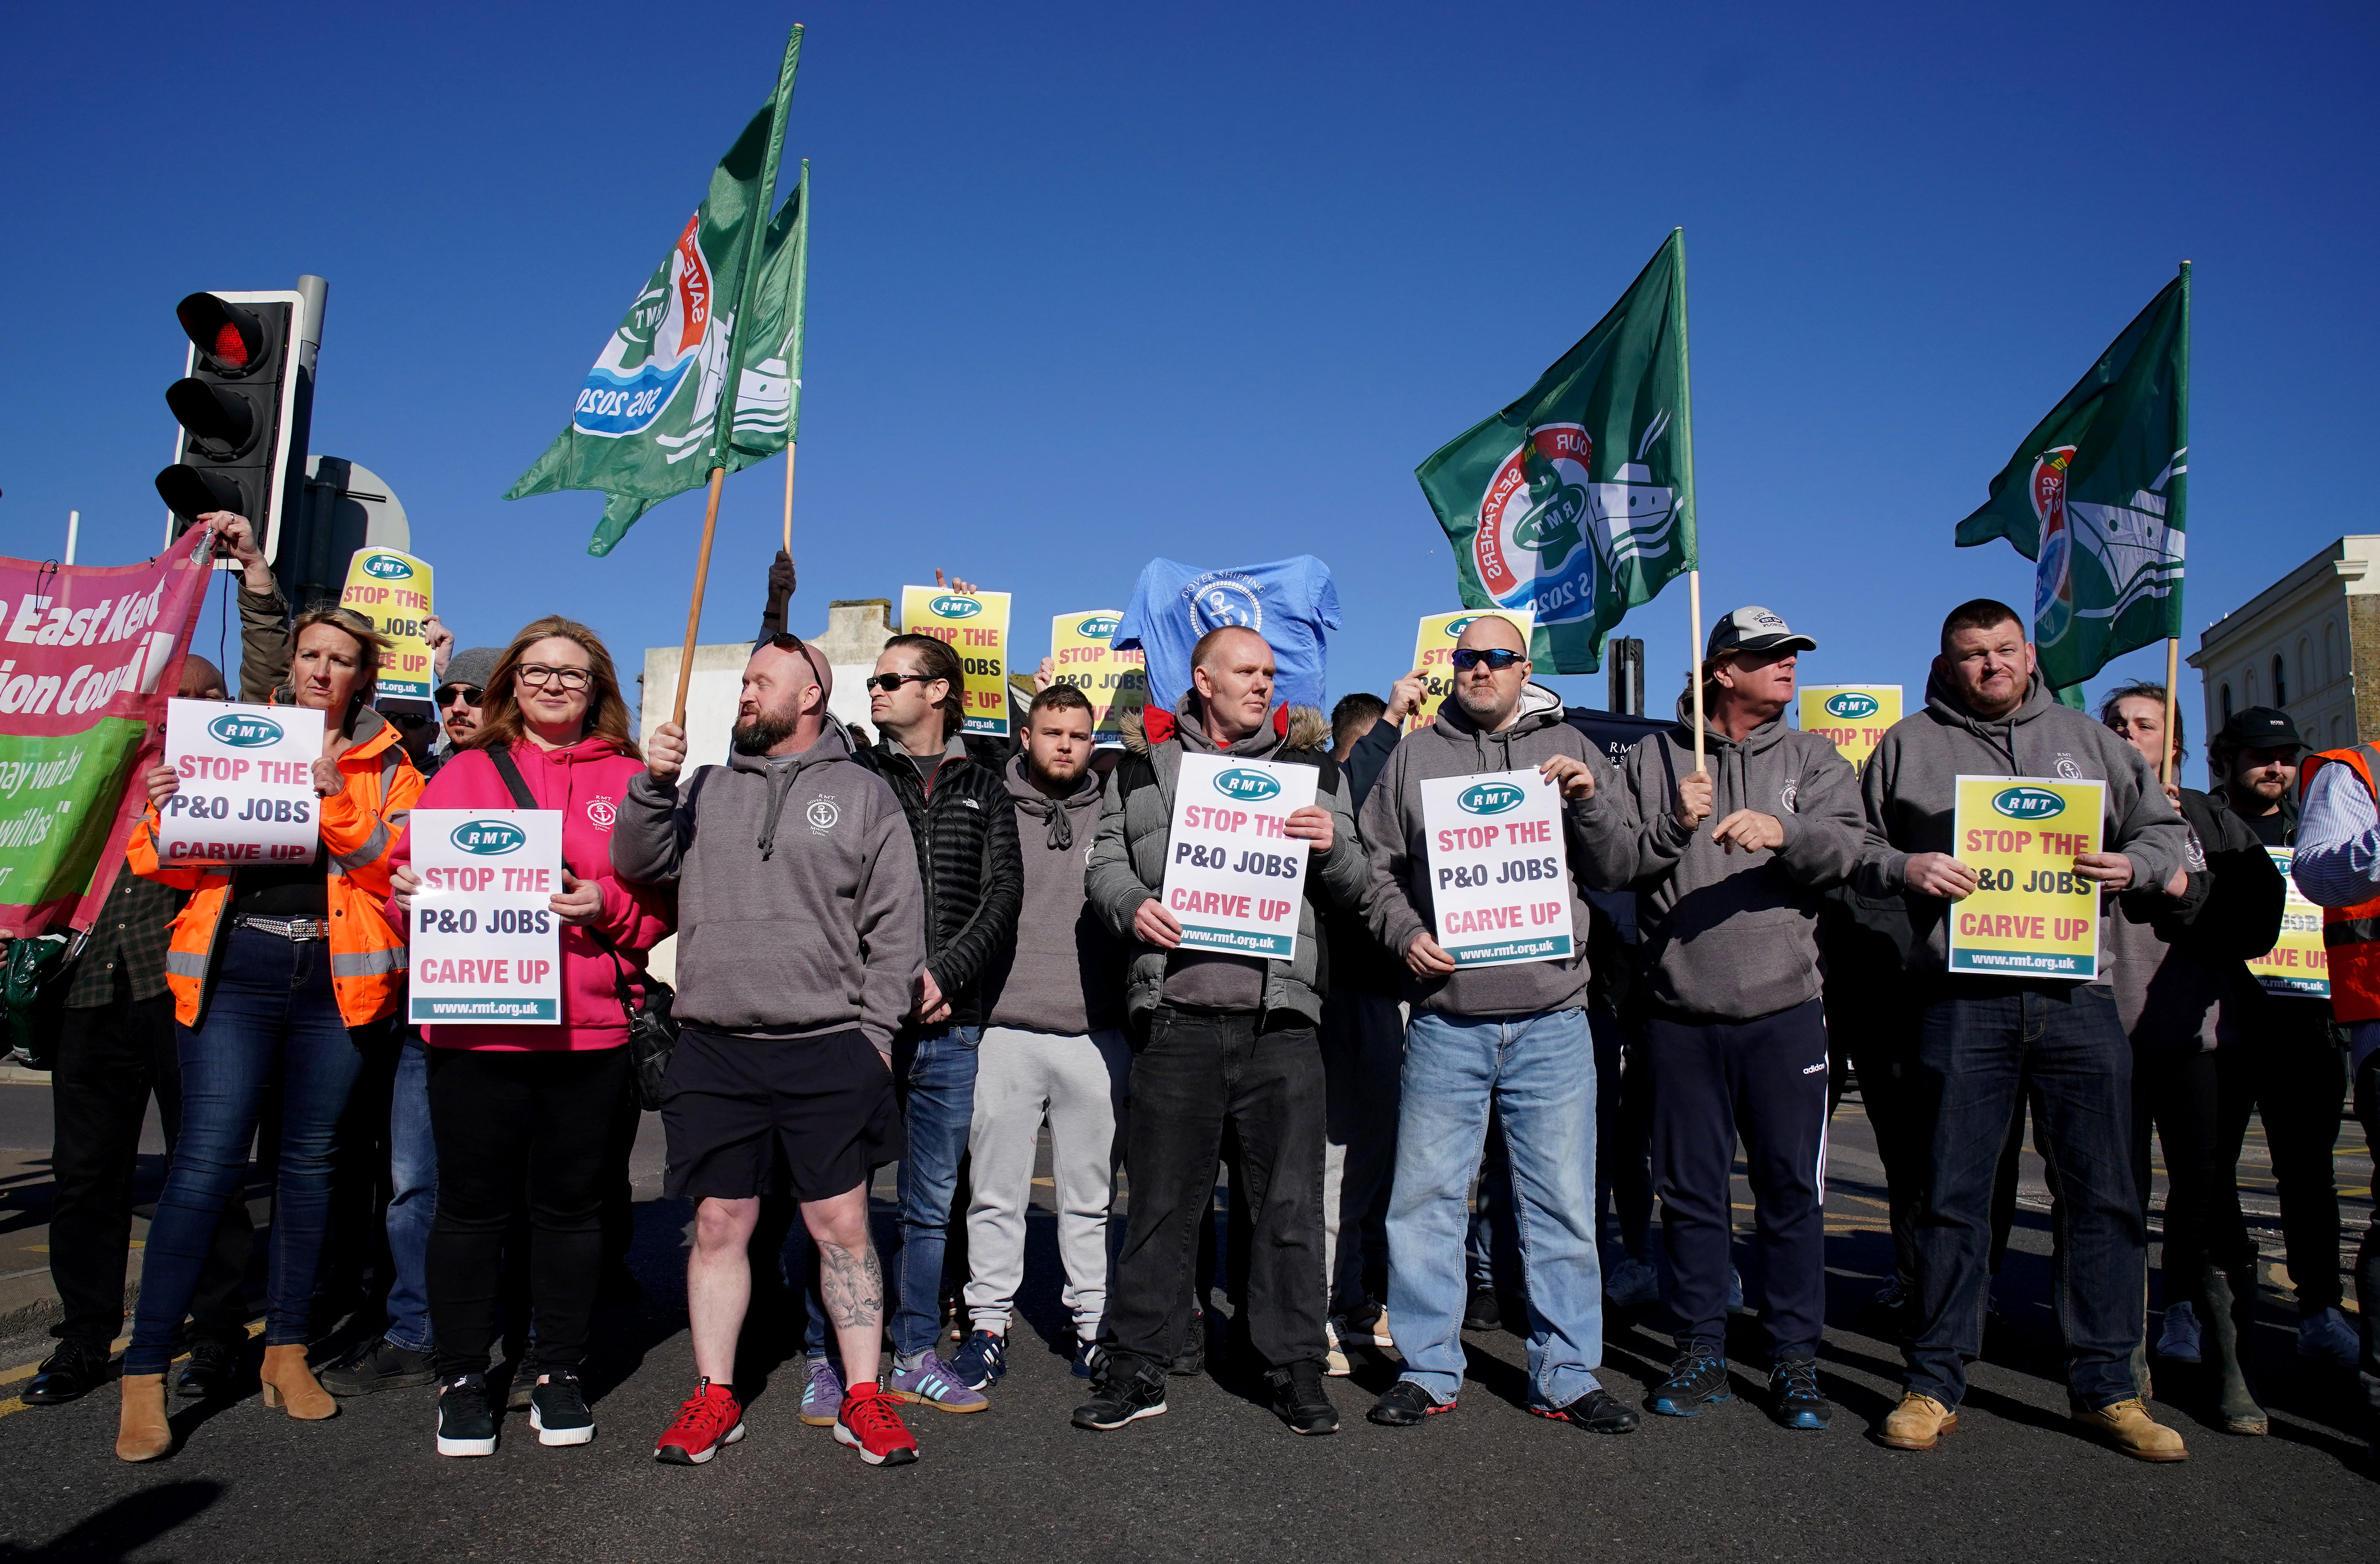 Former P&O staff and RMT union members block the road leading to the Port of Dover after P&O Ferries suspended sailings and handed 800 seafarers immediate severance notices (Gareth Fuller/PA)